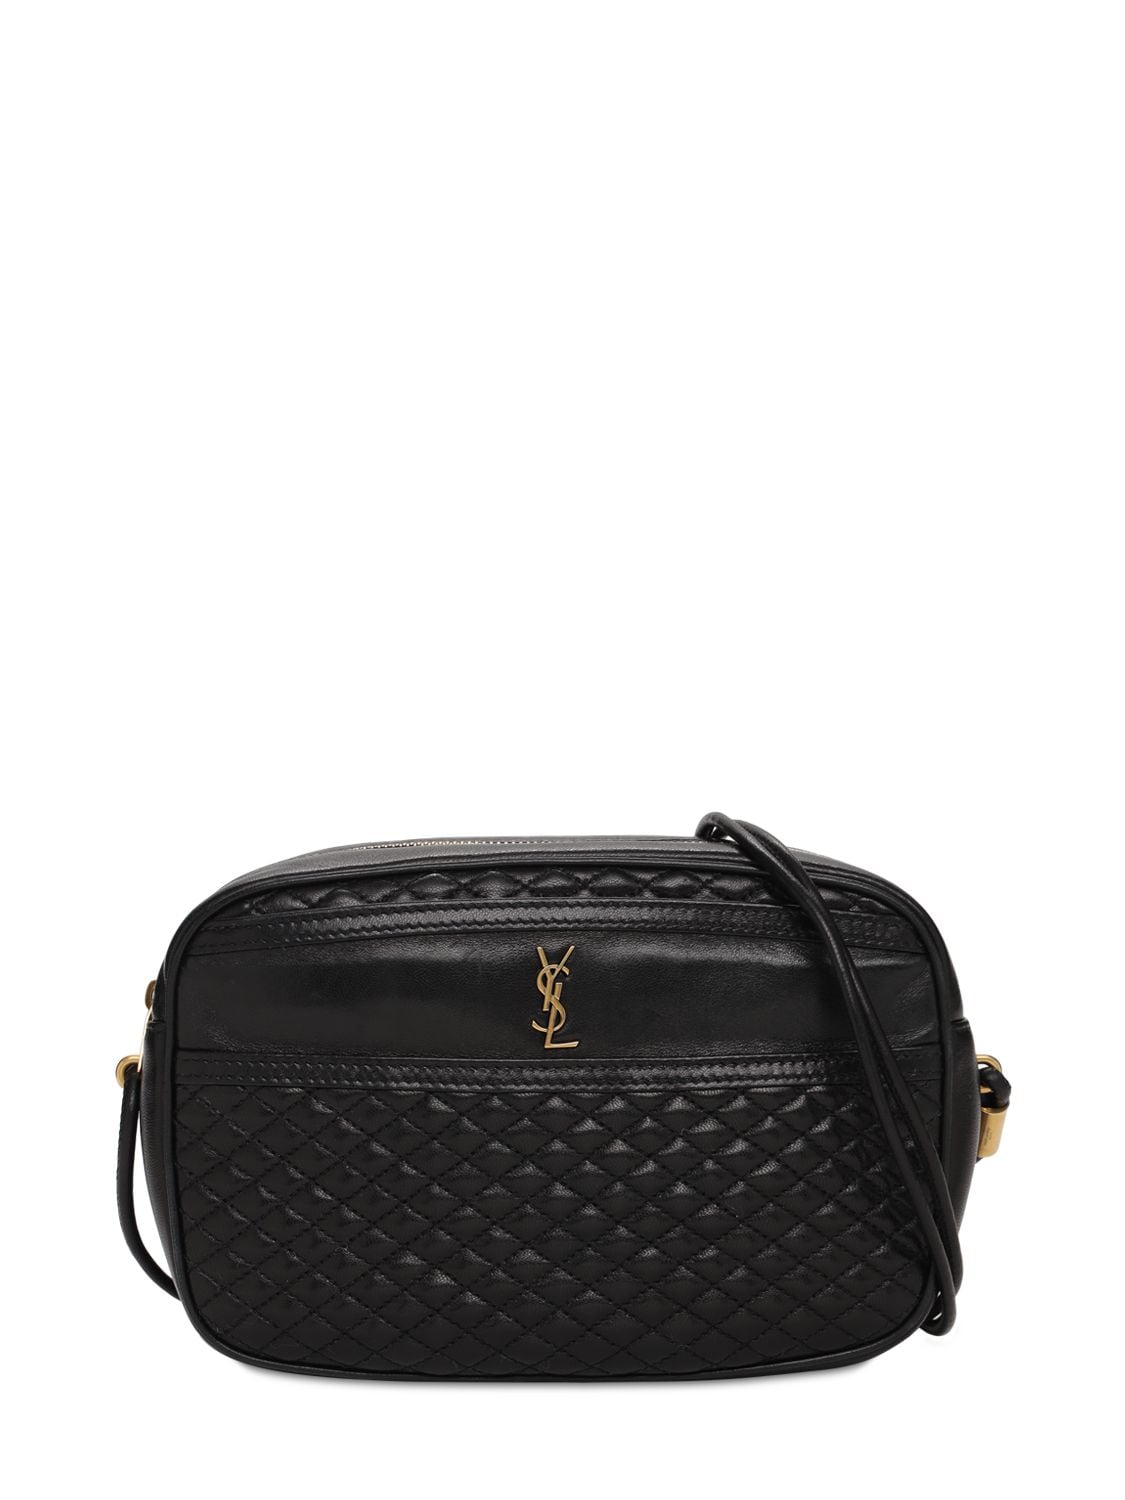 SAINT LAURENT VICTOIRE QUILTED LEATHER CAMERA BAG,73IG1N041-MTAWMA2